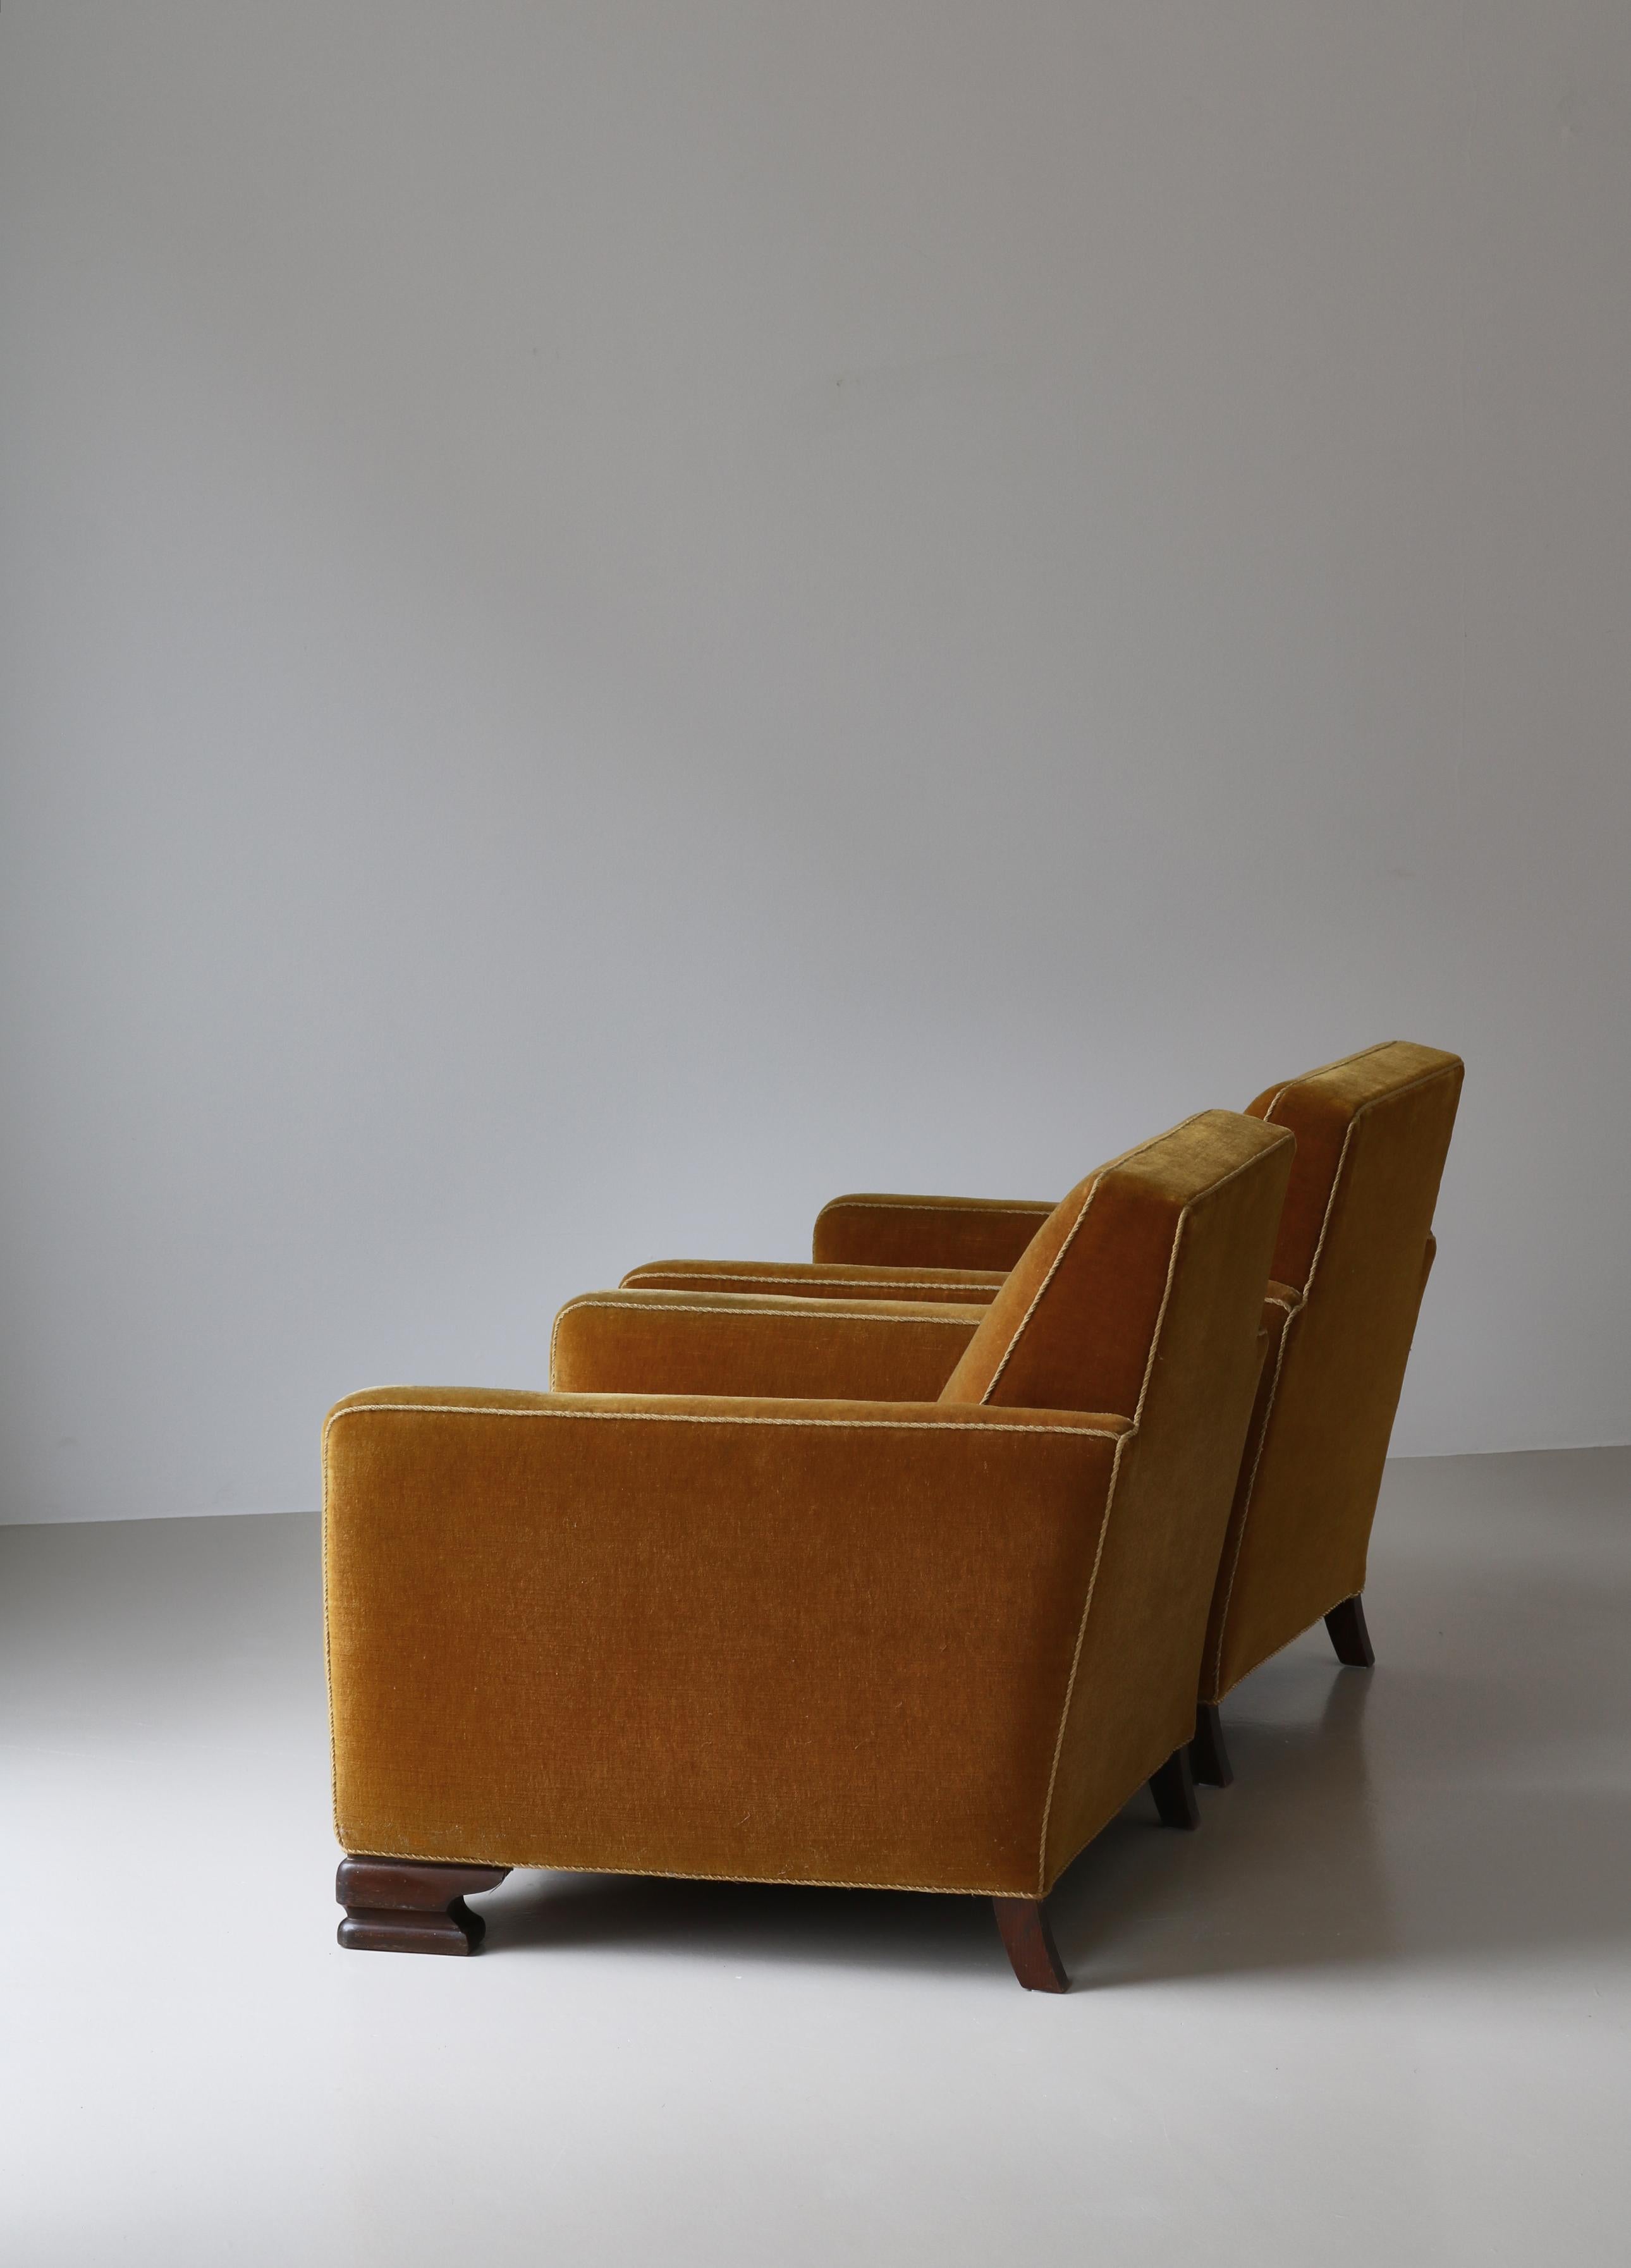 Pair of Danish Cabinetmaker Art Deco Lounge Chairs in Yellow Mohair, 1930s For Sale 3